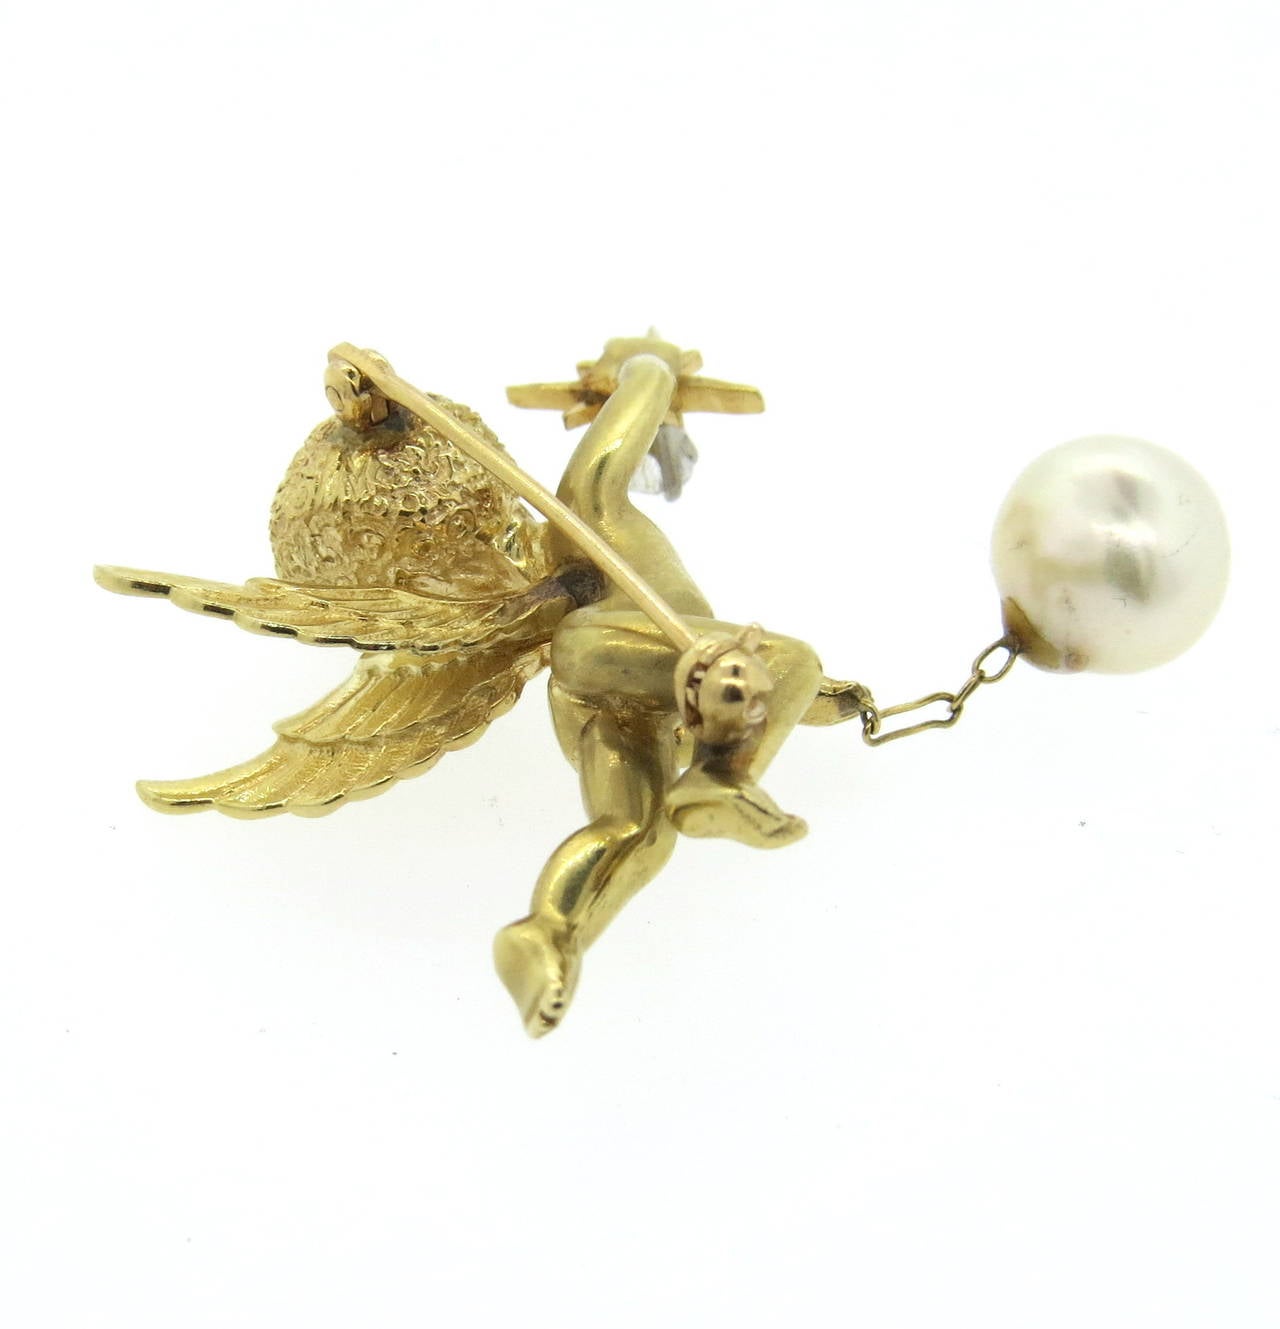 14k gold cherub brooch, set with a diamond, emerald eyes and 9.5mm pearl ball. Brooch is 40mm x 40mm . Weight of the piece - 17.1 grams